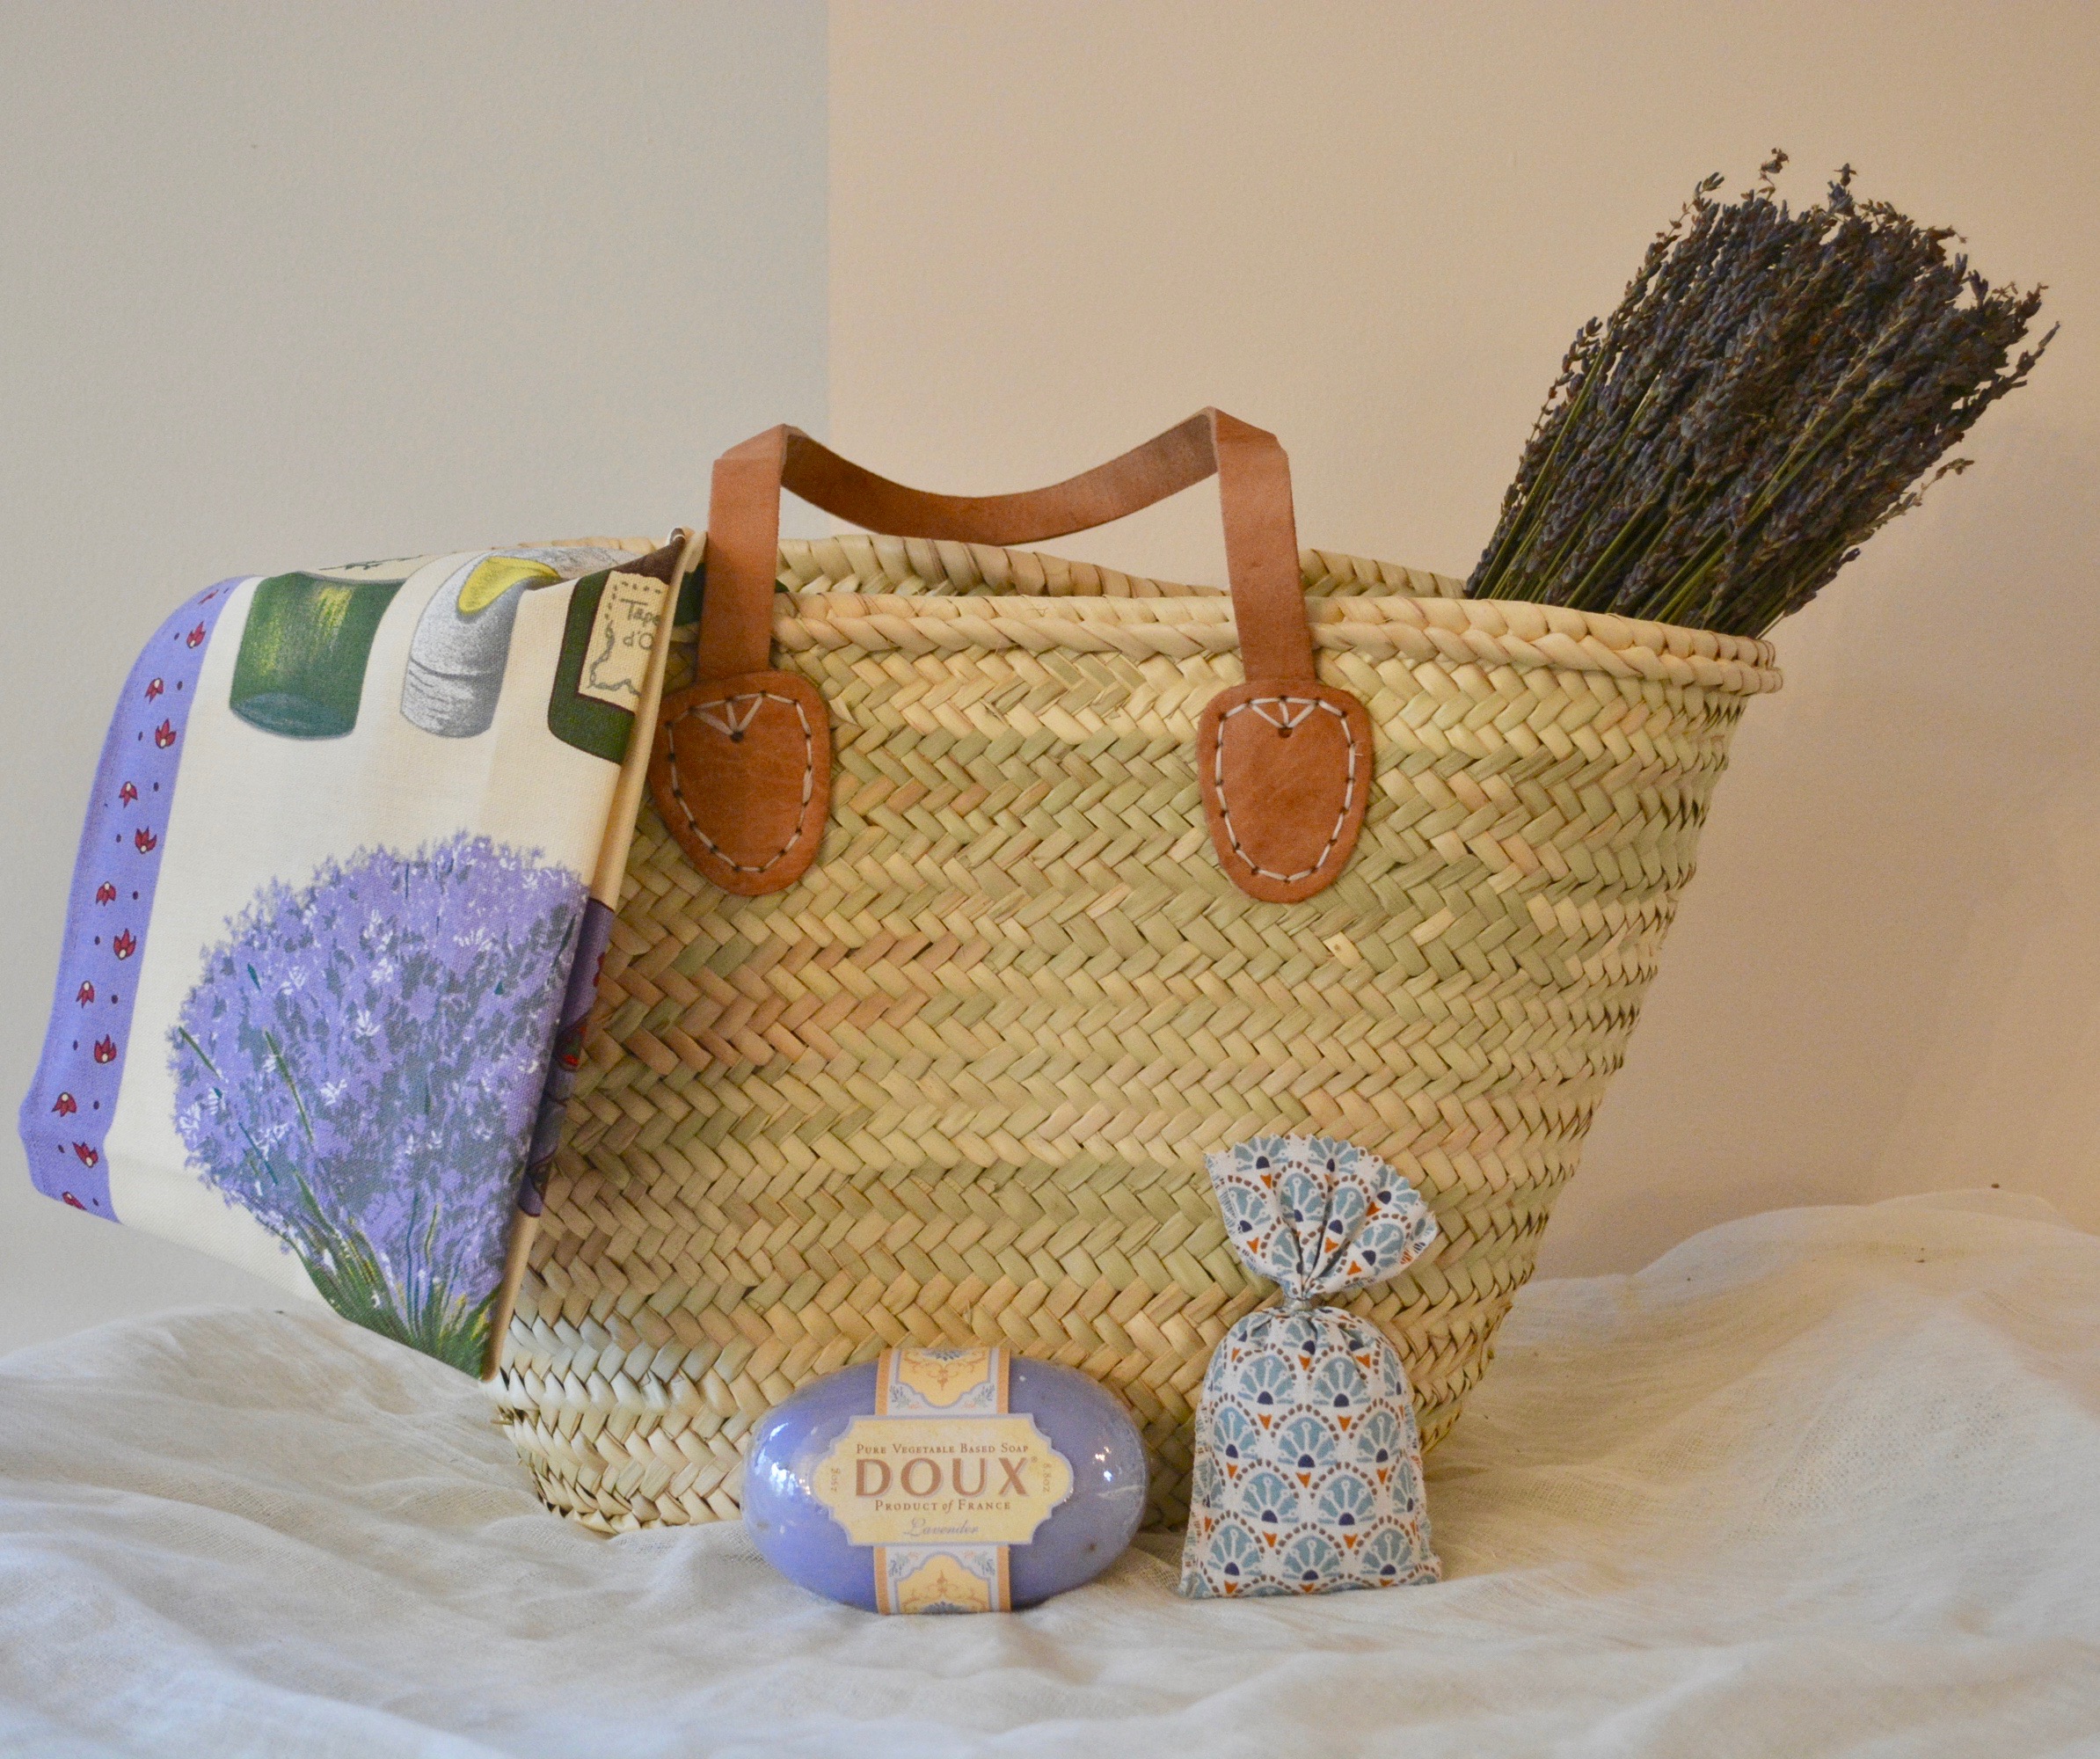 5th Giveaway: For the Love of Lavender Gift Basket from Olive & Branch for the Home